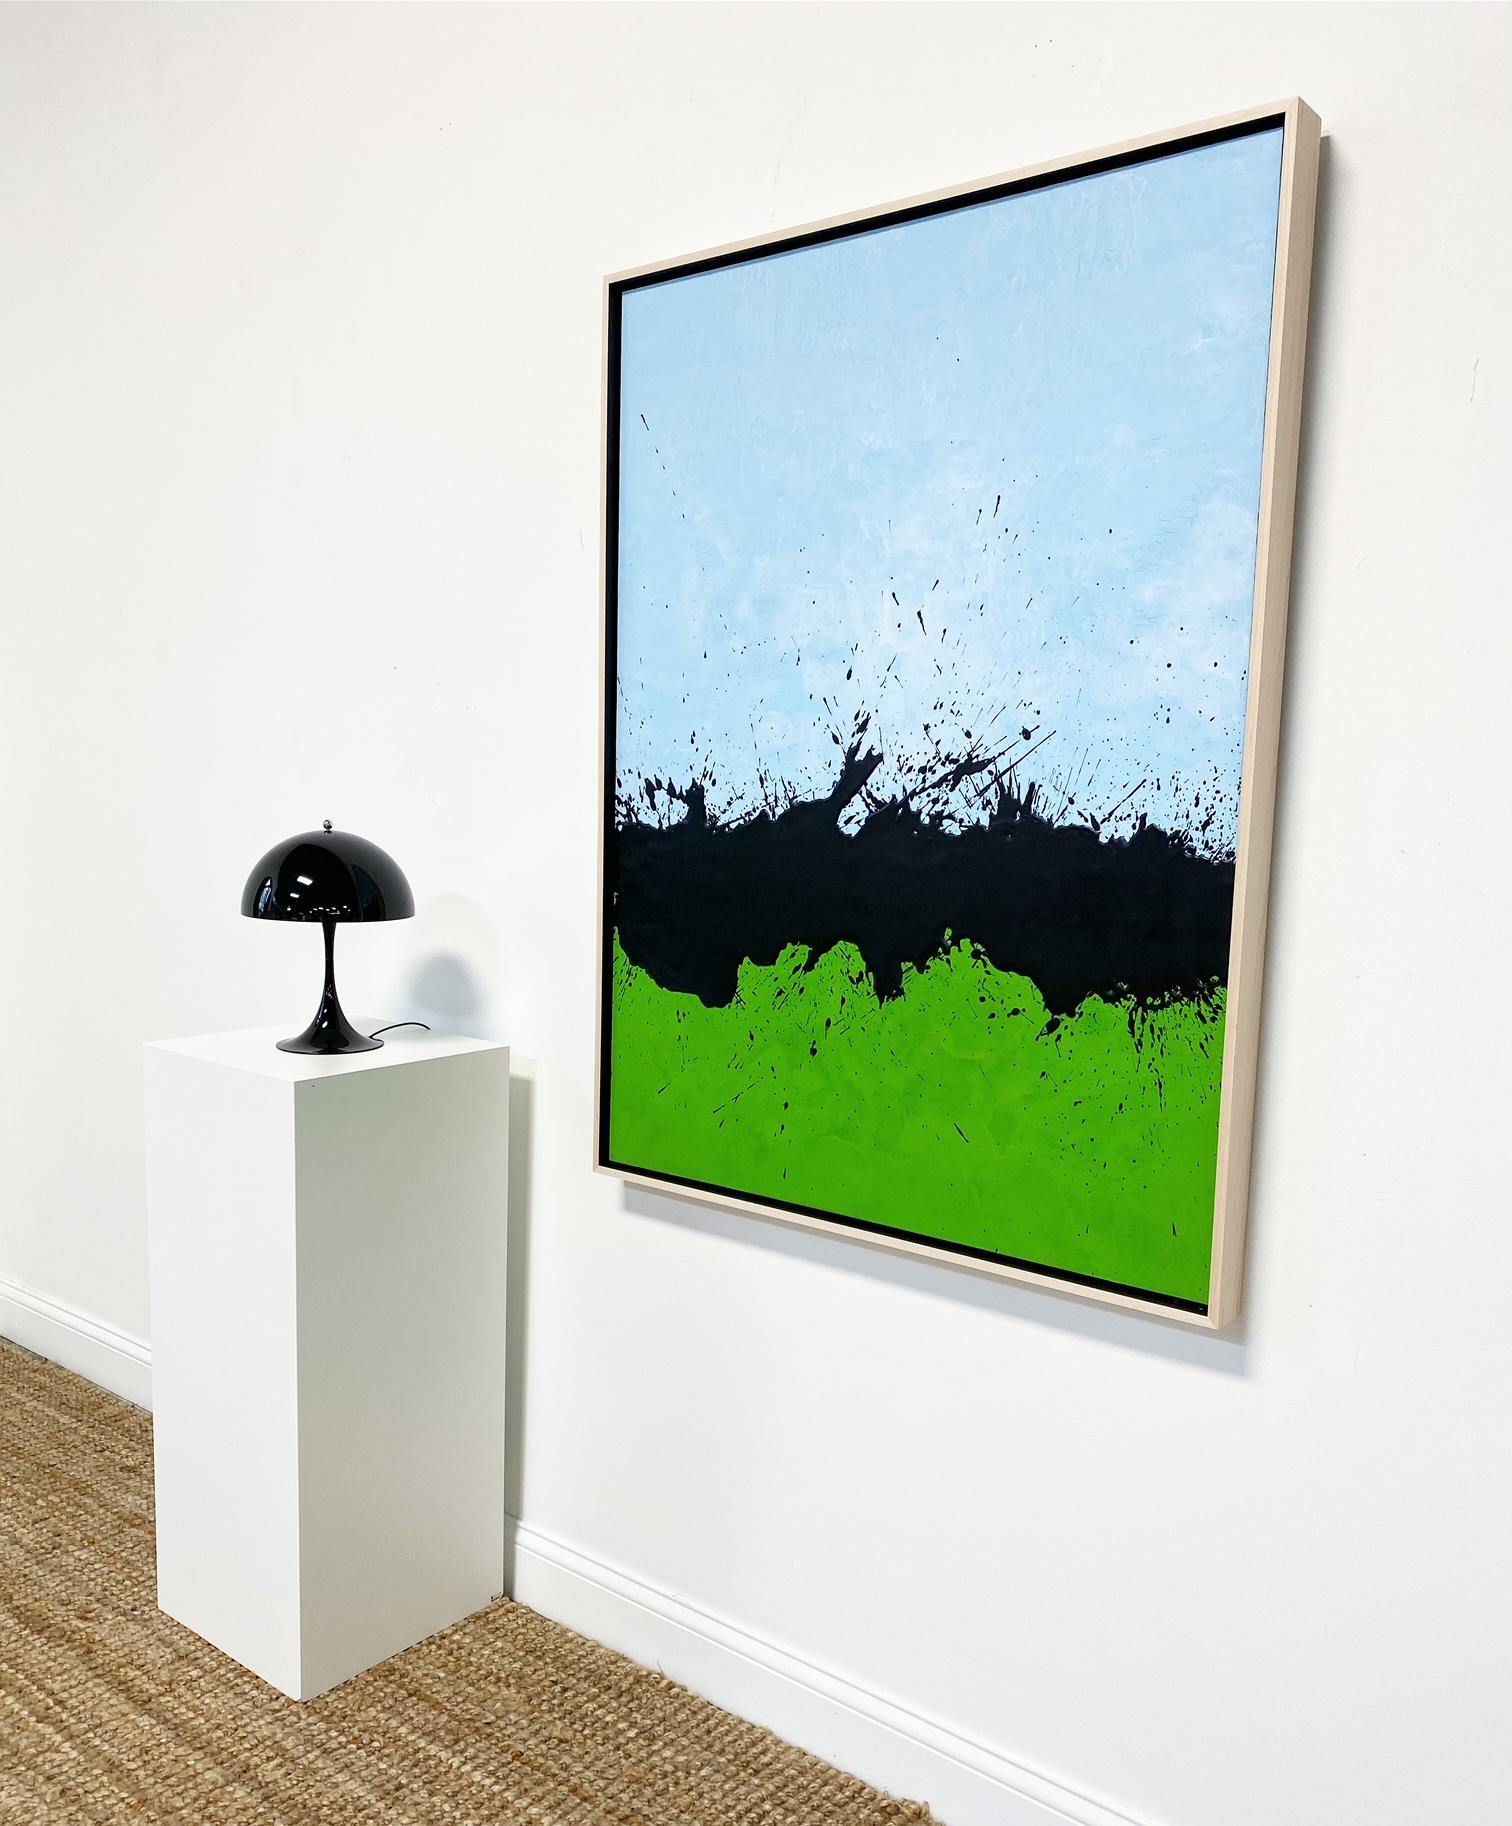 In Tar series.

Art dimensions: 36 x 48 H inches
Framed dimensions: 37.5 x 49.5 inches.

Beautiful, custom maple float frame with black interior.

Forsyth is proud to be the exclusive gallery of John O'Hara (American, b. 1963). O'Hara is a